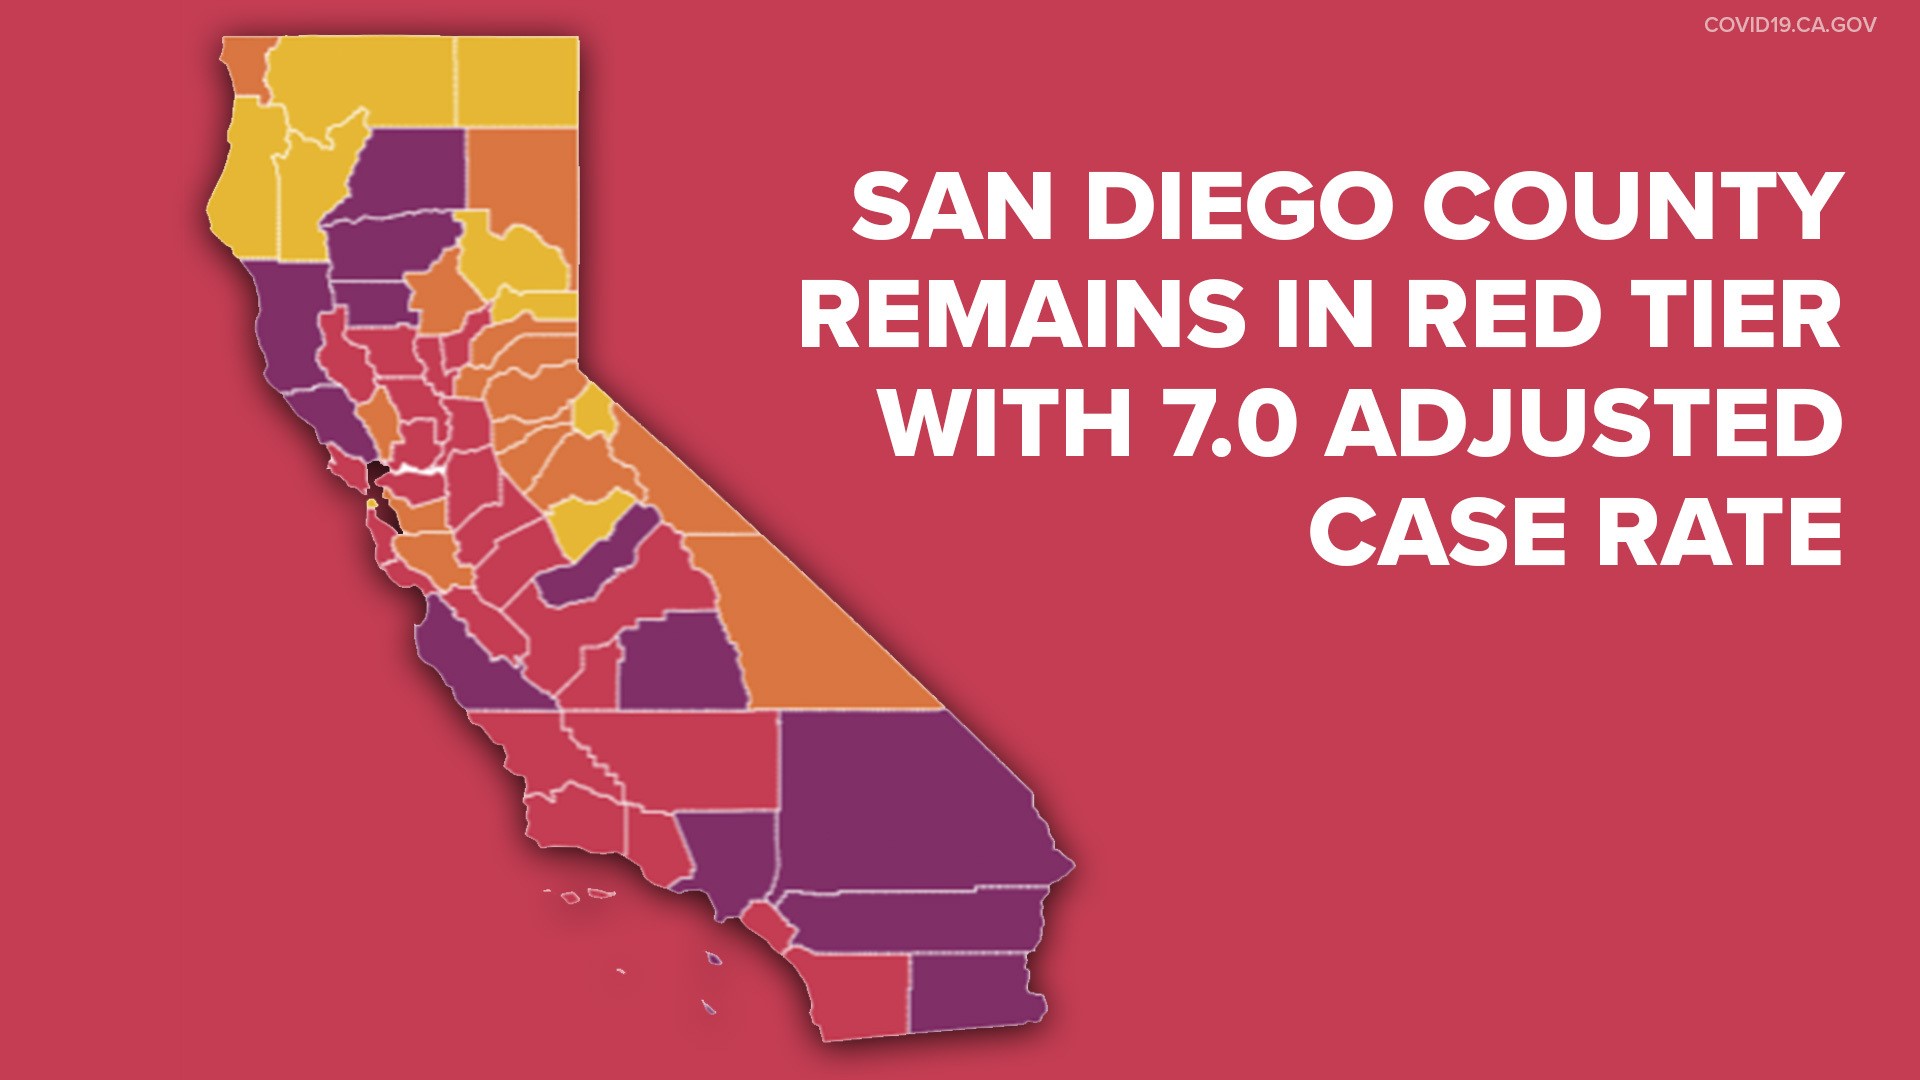 The adjusted case rate change from 7.1 to 7.0 means that the county will not be in jeopardy of moving to the more-restrictive purple tier on Oct 27.